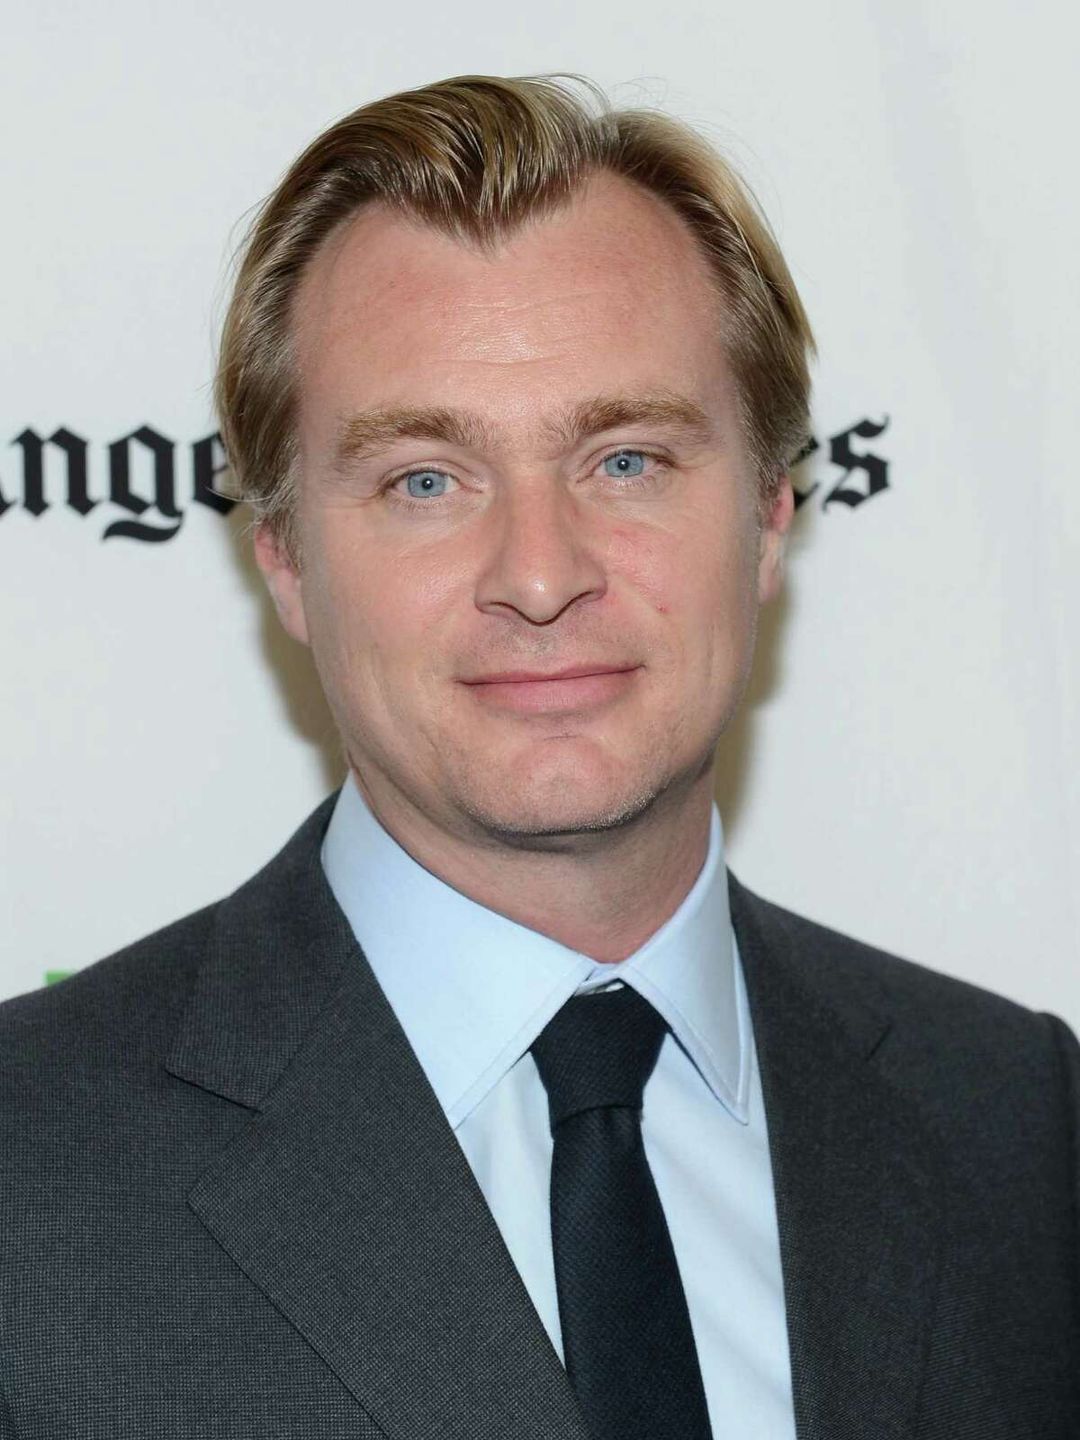 Christopher Nolan how old is he